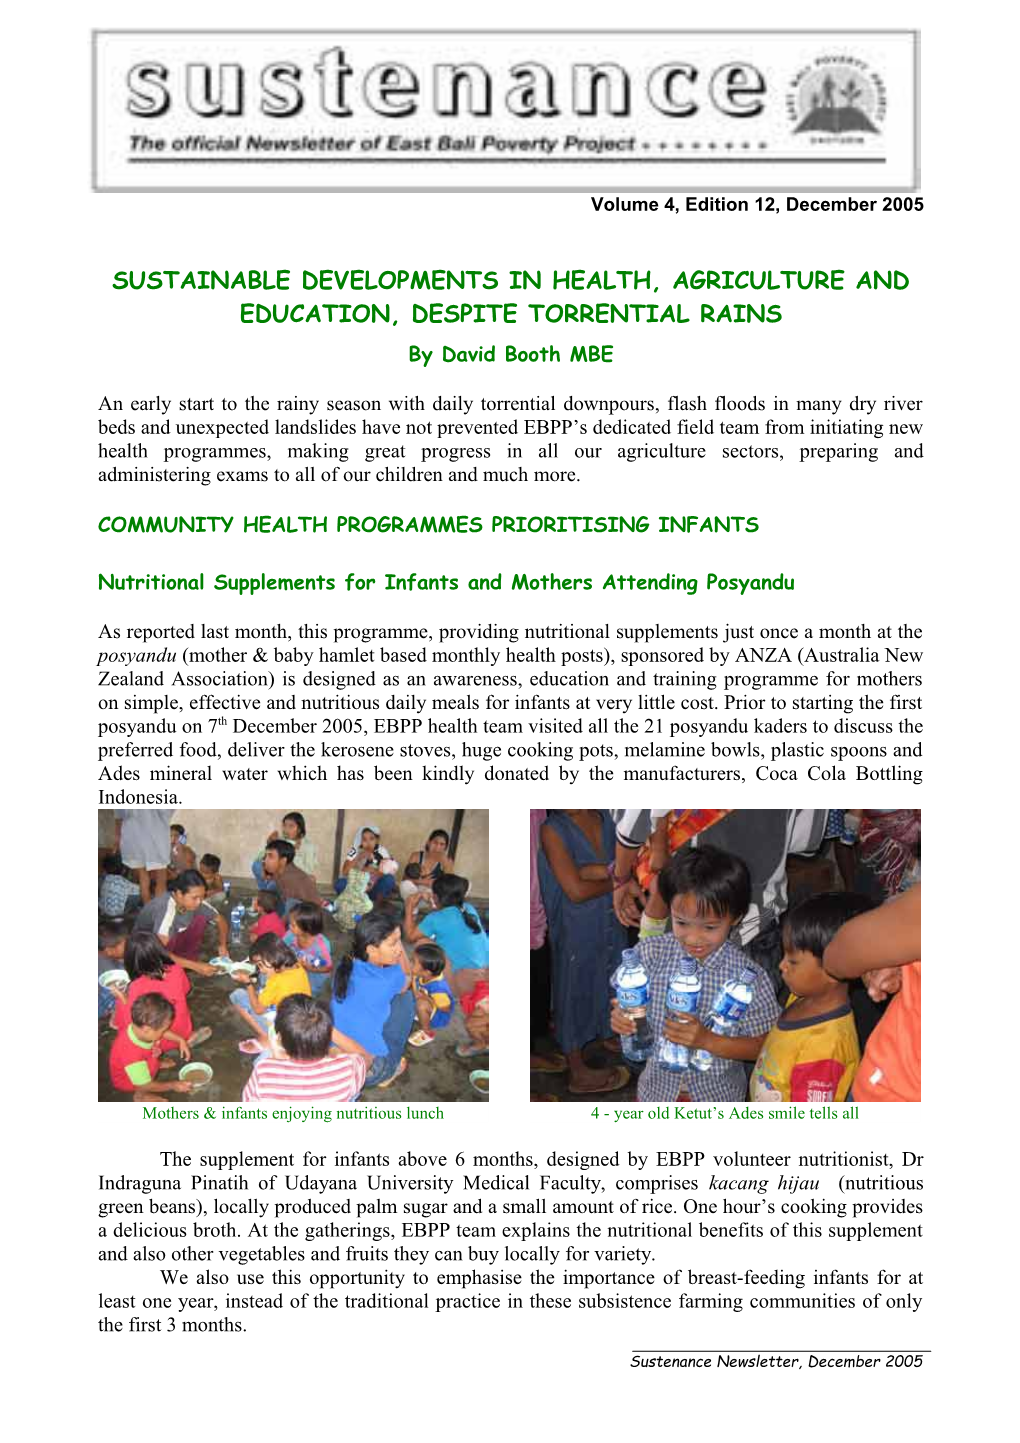 Sustainable Developments in Health, Agriculture and Education, Despite Torrential Rains